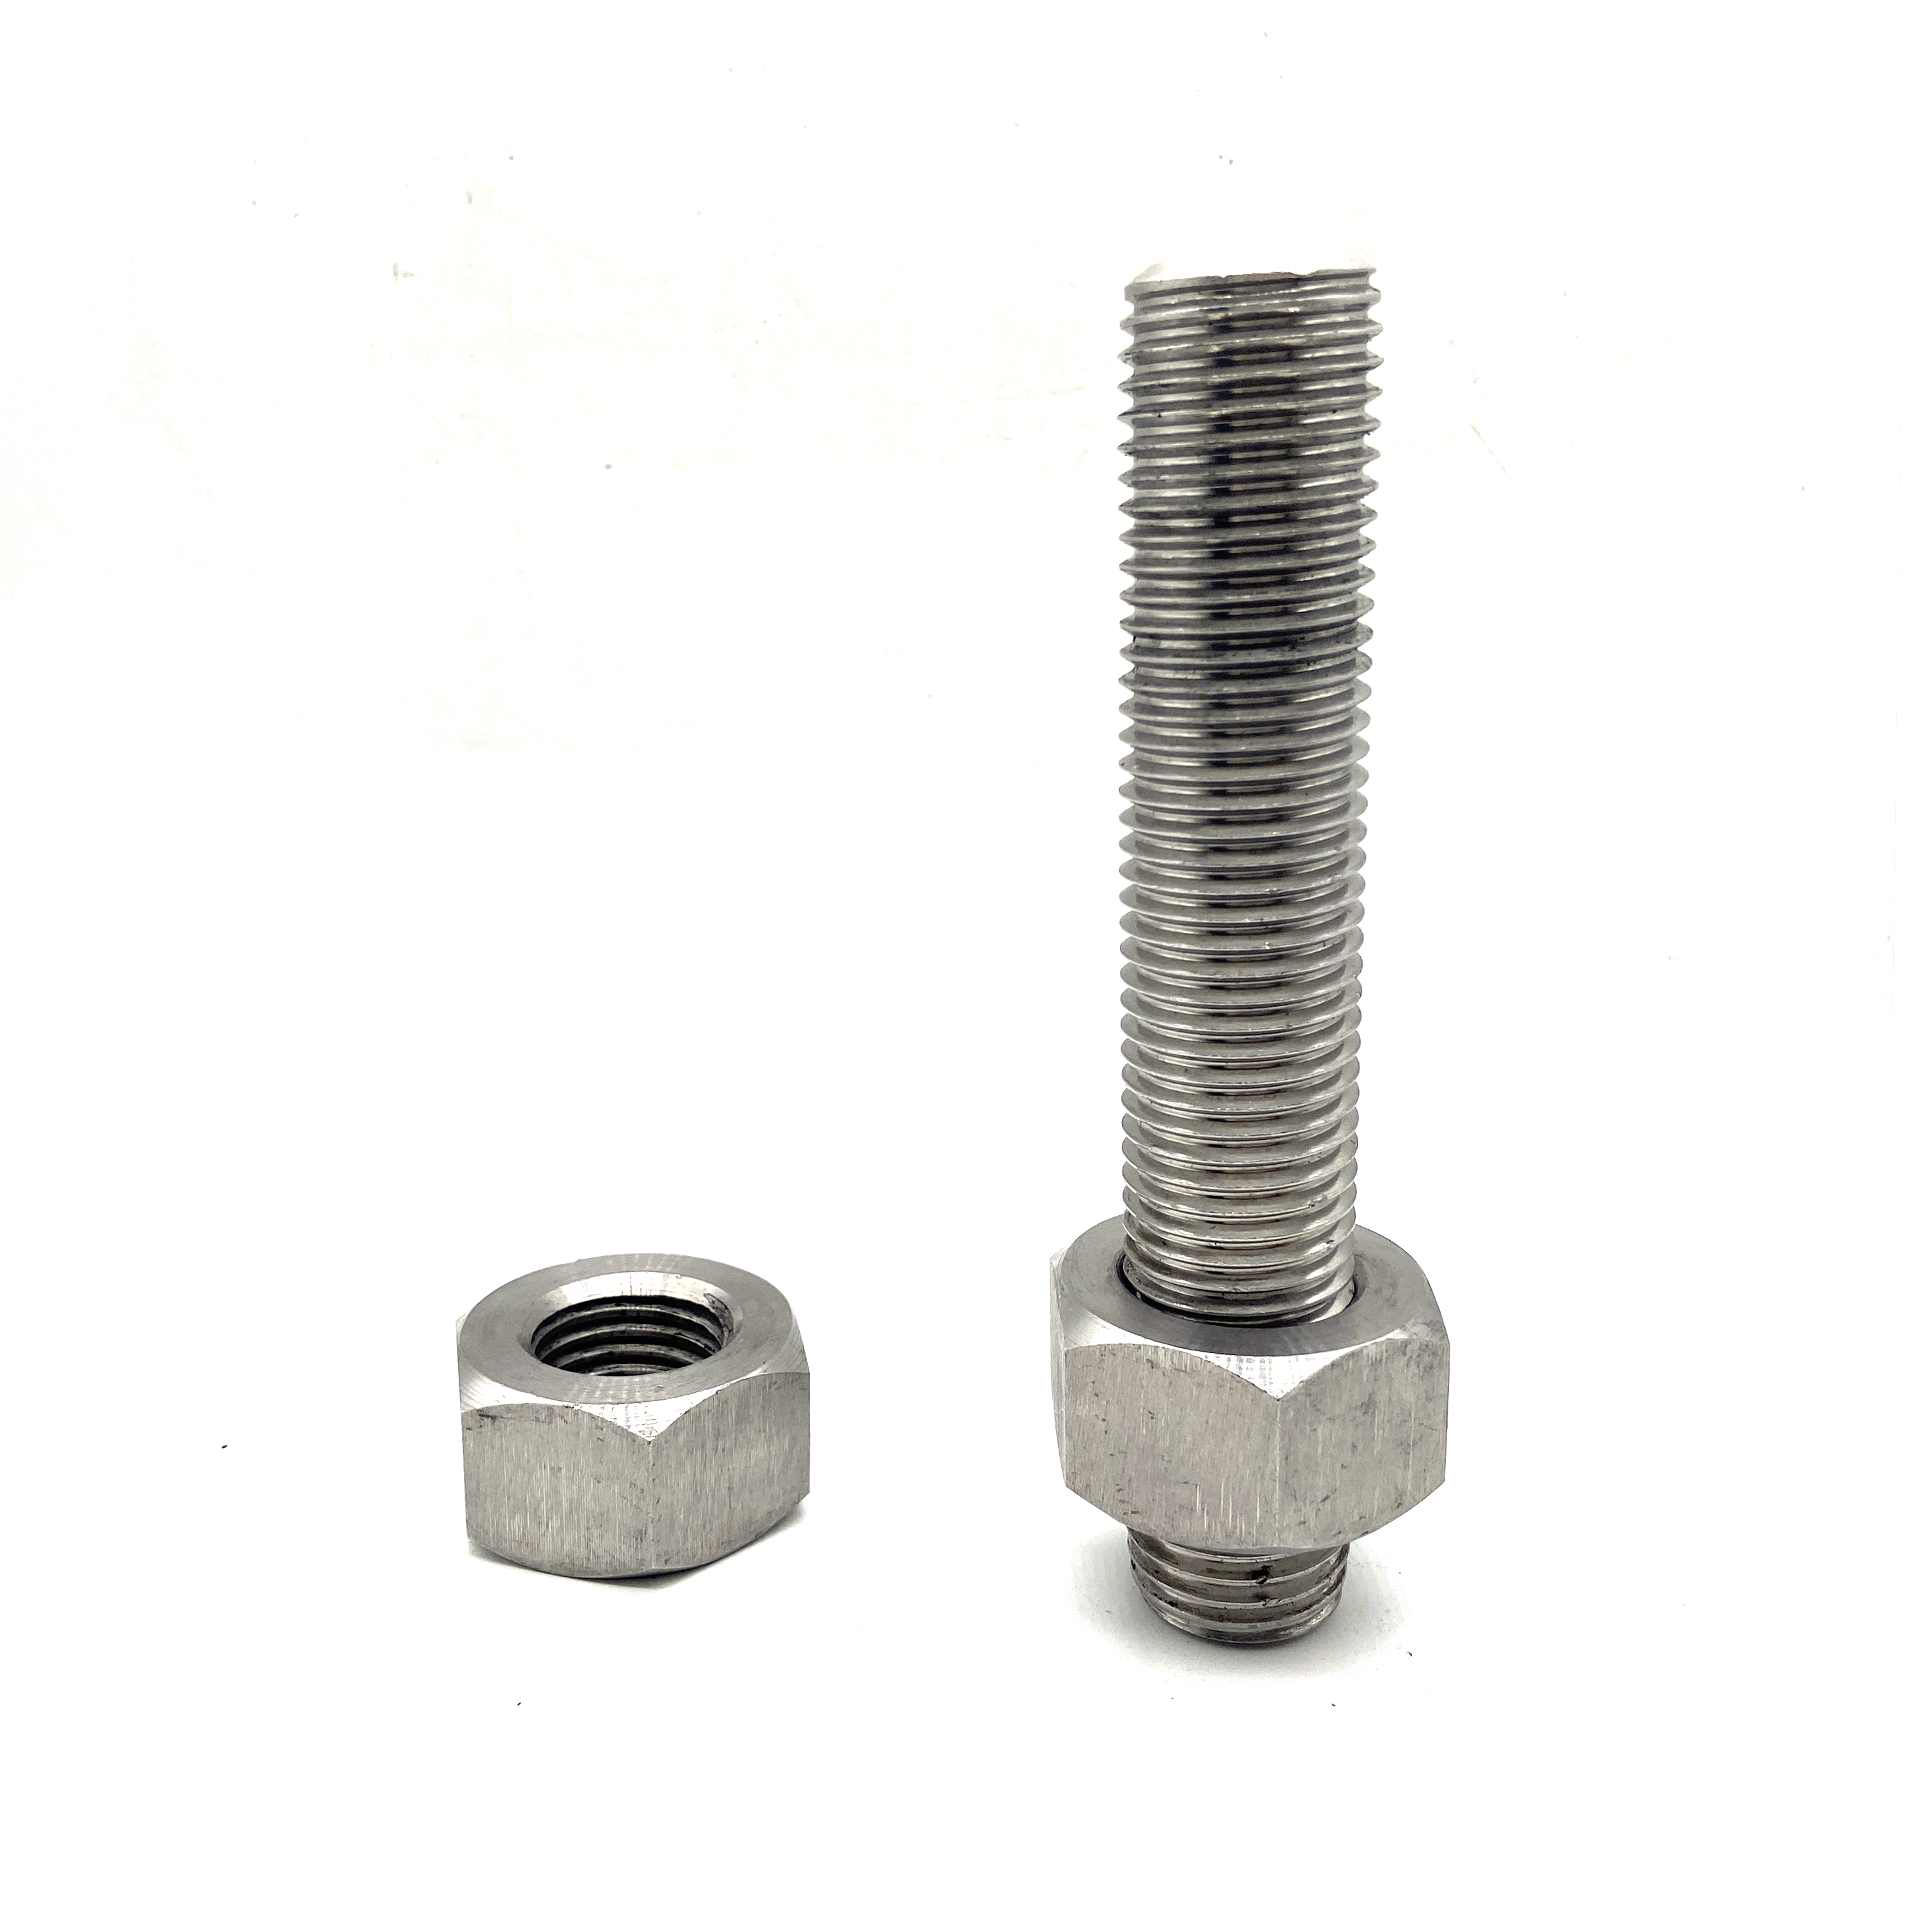 10mm Hex Standard Full Nut 304 A2 70 Qty 10 Stainless Steel M10 